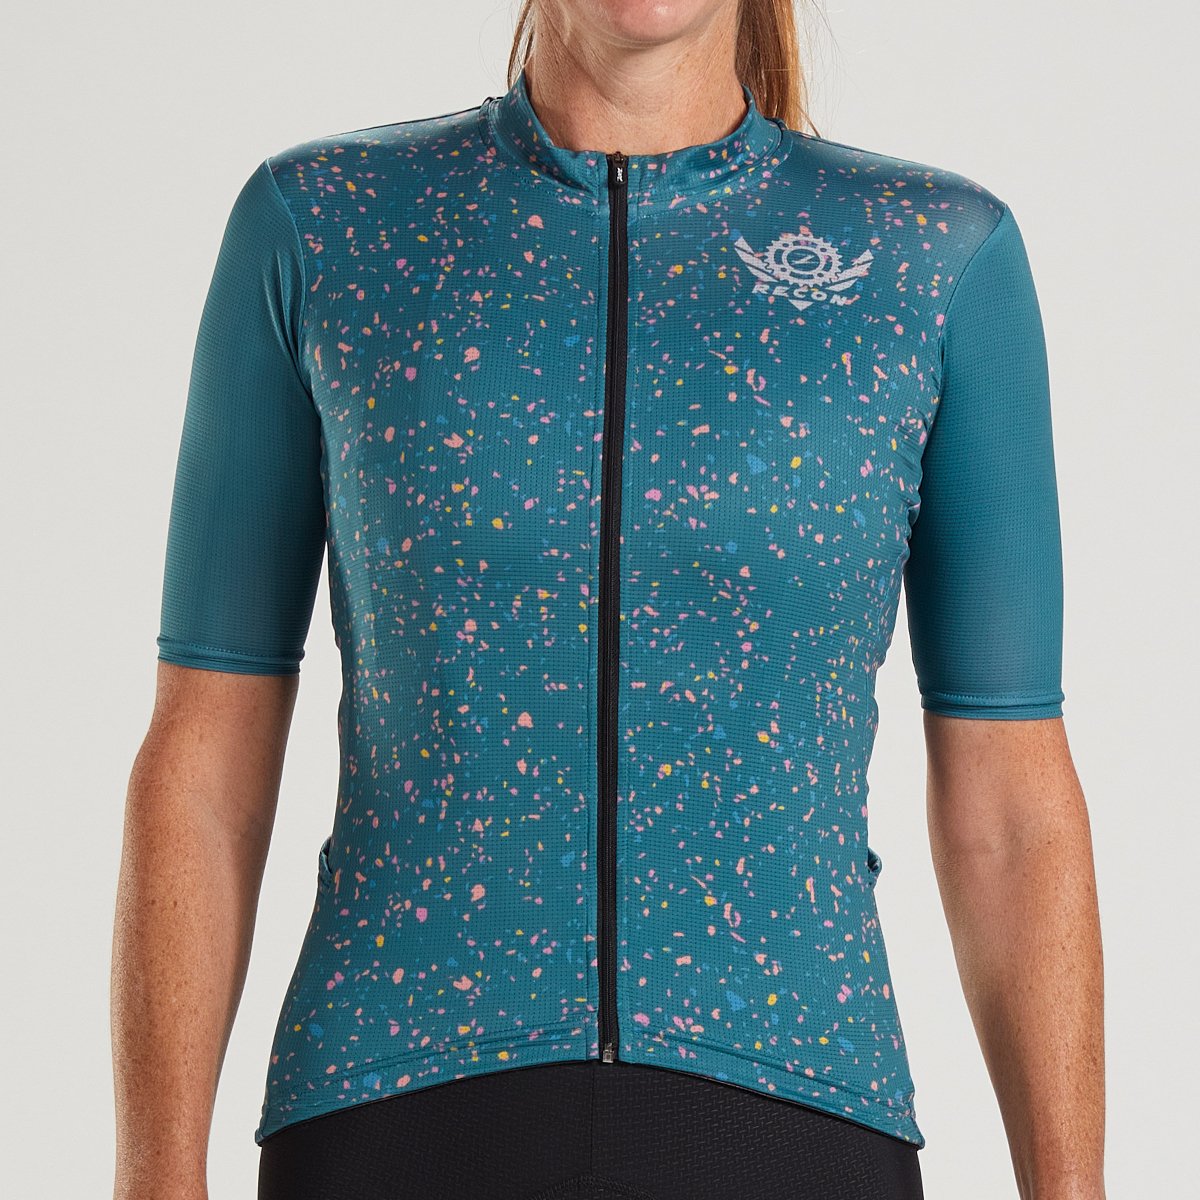 Zoot Sports CYCLE APPAREL WOMENS RECON CYCLE JERSEY - JADE